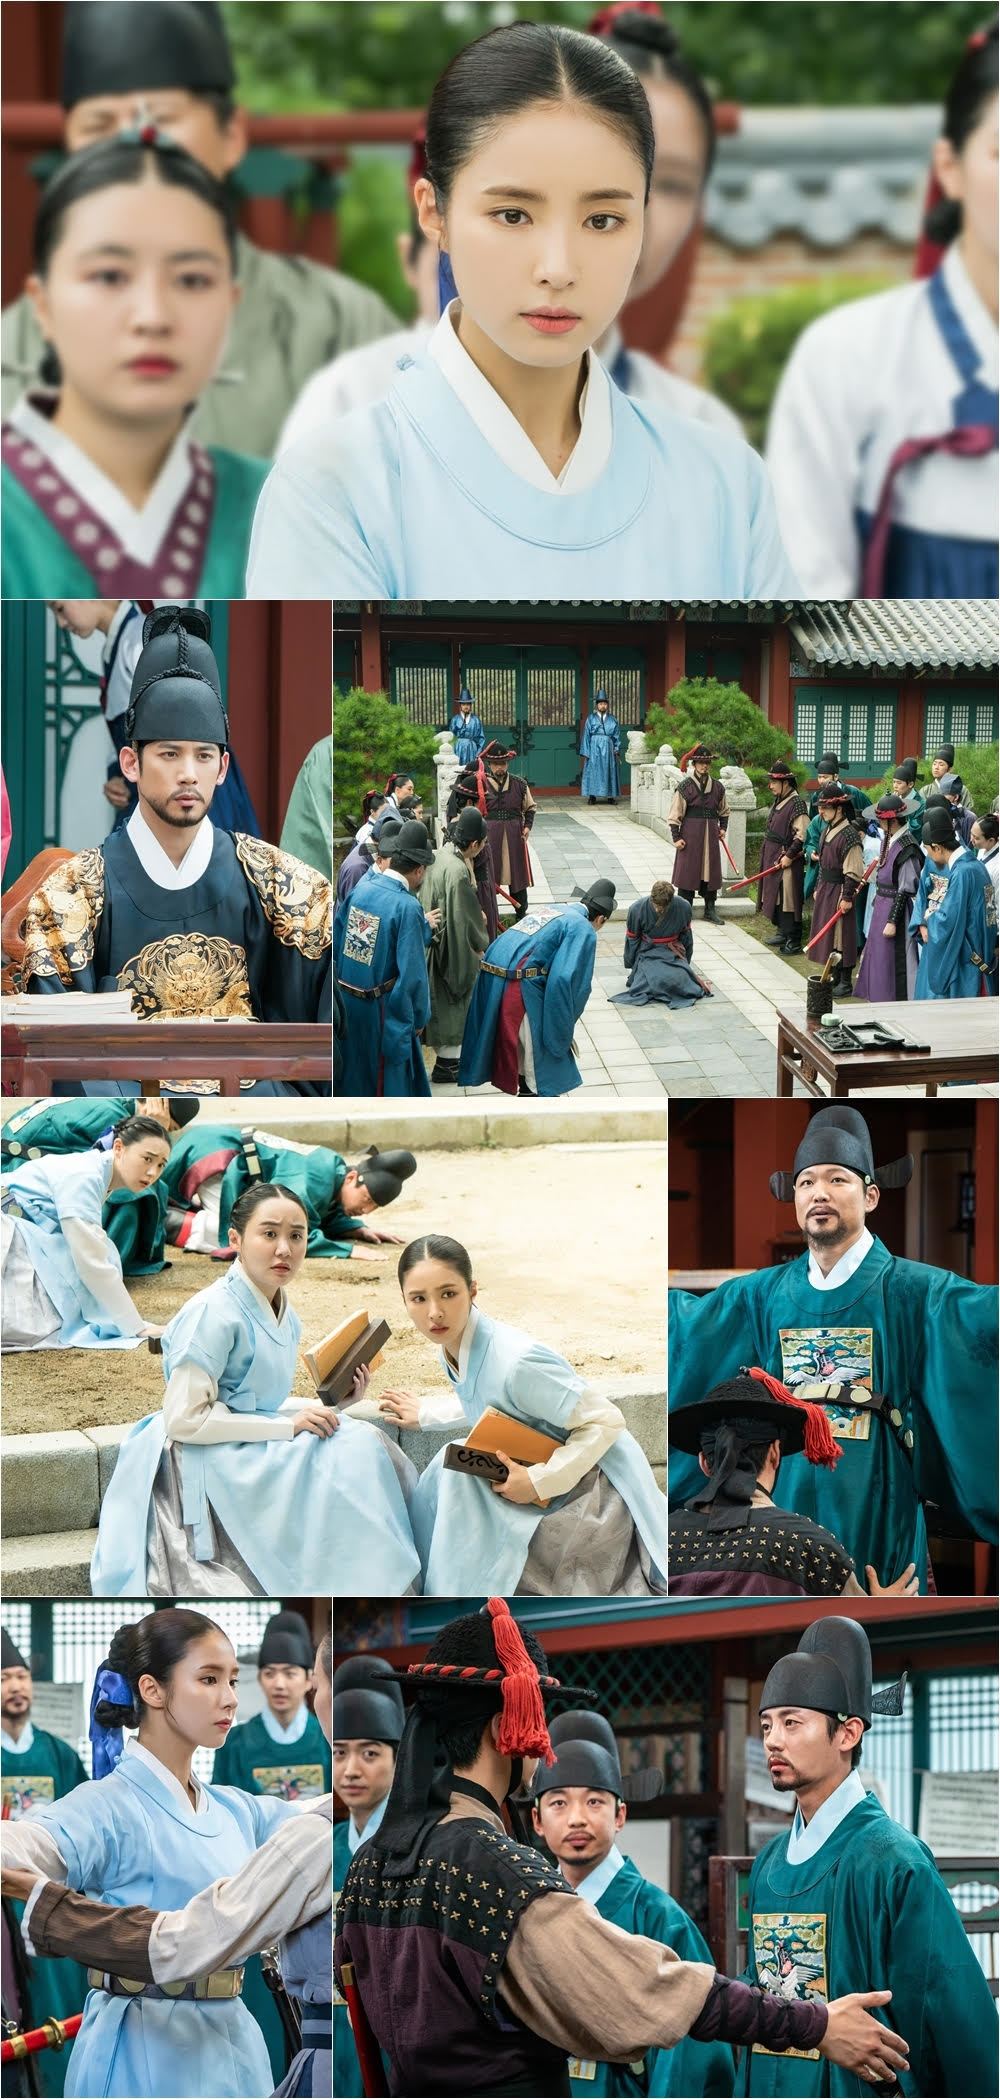 The MBC drama The New Entrepreneur Rookie Historian Goo Hae-ryung depicts Shin Se-kyung (Rookie Historian Goo Hae-ryung) who is curious alone in the palace of Mt.Shin Se-kyung is shining his lantern eyes with curiosity.On the other hand, all the courtiers around her are not able to move forward, and the crown prince Park Ki-woong (binary) is also making a disturbing look.At the end of their gaze, a Foreign is sitting on his knees in the middle of the Donggungjeon courtyard, concentrating attention.Shin Se-kyung is interested in how he came to the Joseon palace as a native of the Qing Dynasty, while the courts are talking about the unfamiliar appearance of Foreign for the first time in his life.Shin Se-kyung is surprised and wary of the surroundings while returning to the presbytery with Lee Ye-rim (Oh Eun-im), Jang Yu-bin (Hua Aran), and senior officers.Especially, it stimulates curiosity by guessing that there was an incident that shook the palace through the appearance of senior officers who are afraid to lie down on the floor.In addition, the officers are exposed to the scene where they are being treated by the officials who suddenly come to the temple.Unlike Shin Se-kyung, who is opening his arms in a dull manner, and Heo Jeong-do (the two-time run), who is sighing and sighing as if resigned, Lee Ji-hoon (Min Woo-won) stands firmly in his position as if refusing to Caught in the Web.The new officer Rookie Historian Goo Hae-ryung said, The whole palace is in chaos due to the appearance of Foreign, which is too different from head to toe.Indeed, the courts should check how they will respond to the appearance of Foreign and how his appearance will affect the drama. The New Entrance Officer Rookie Historian Goo Hae-ryung, starring Shin Se-kyung, Jung Eun-woo, and Park Ki-woong, is the first problematic first lady of Joseon () Rookie Historian Goo Hae-ryung and the anti-war mother Solo Prince Lee Rim (Chaung Eun-woo) Phils full romance annals.Today (28th) is broadcast 25 and 26 times at 8:55 p.m.